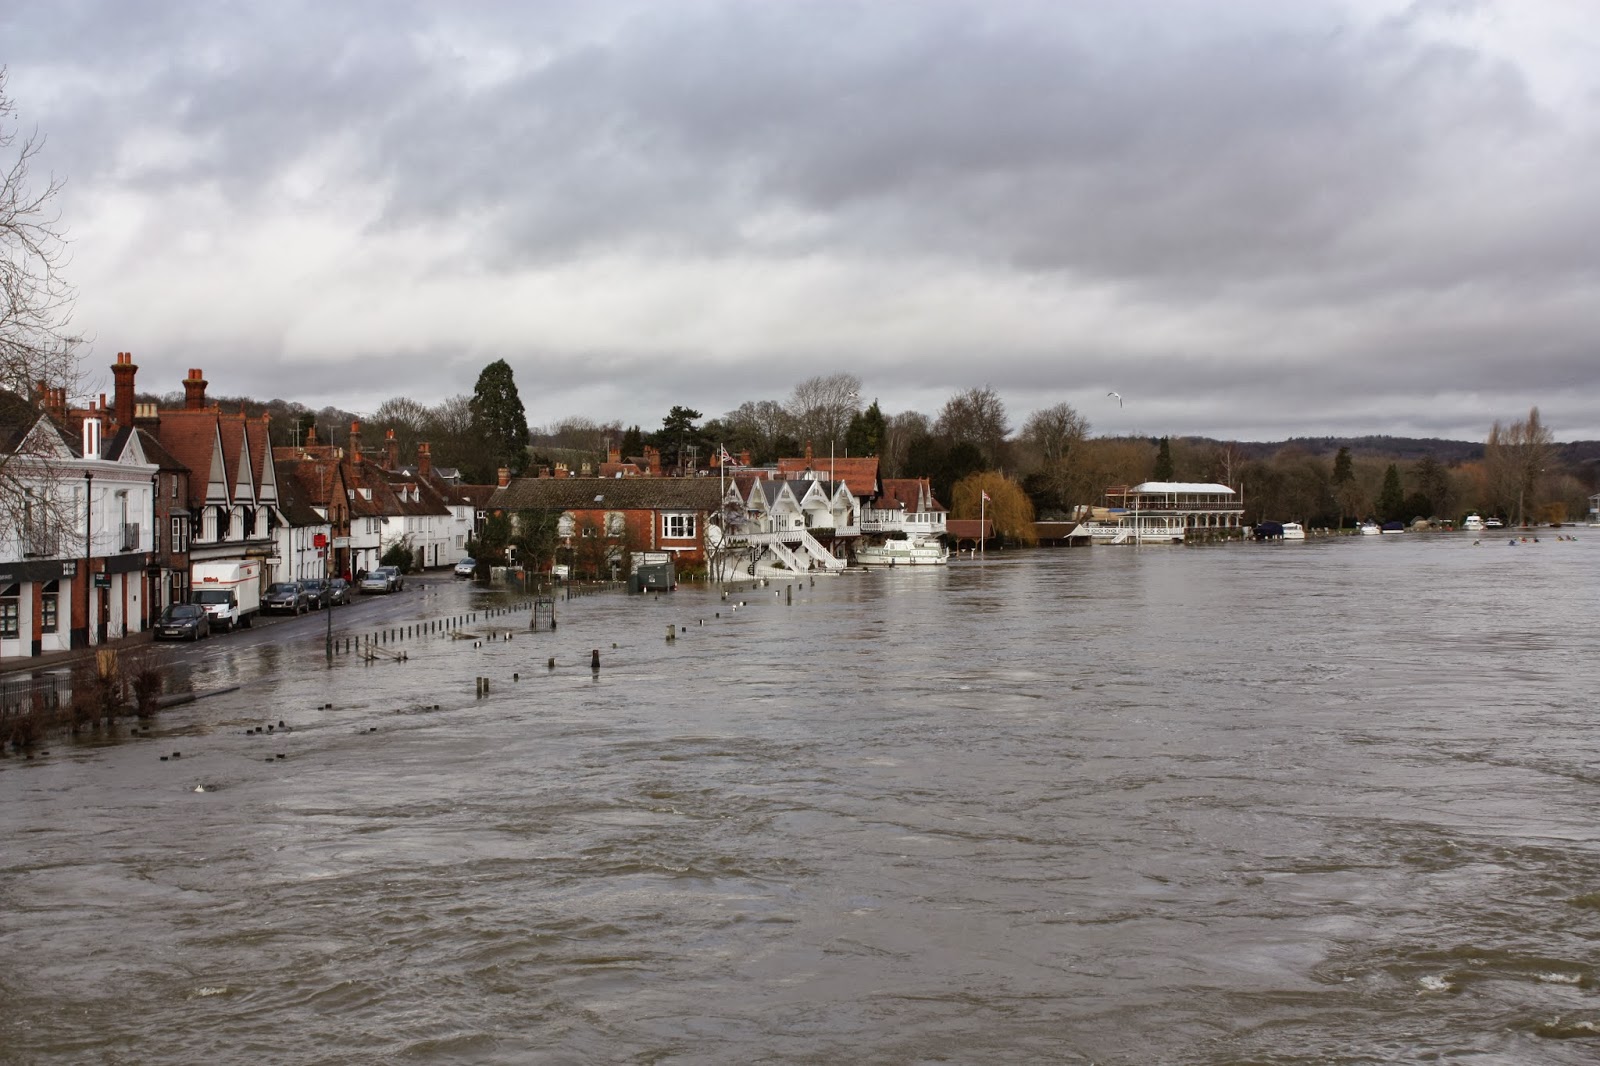 Flooded Regatta course in Henley on Thames